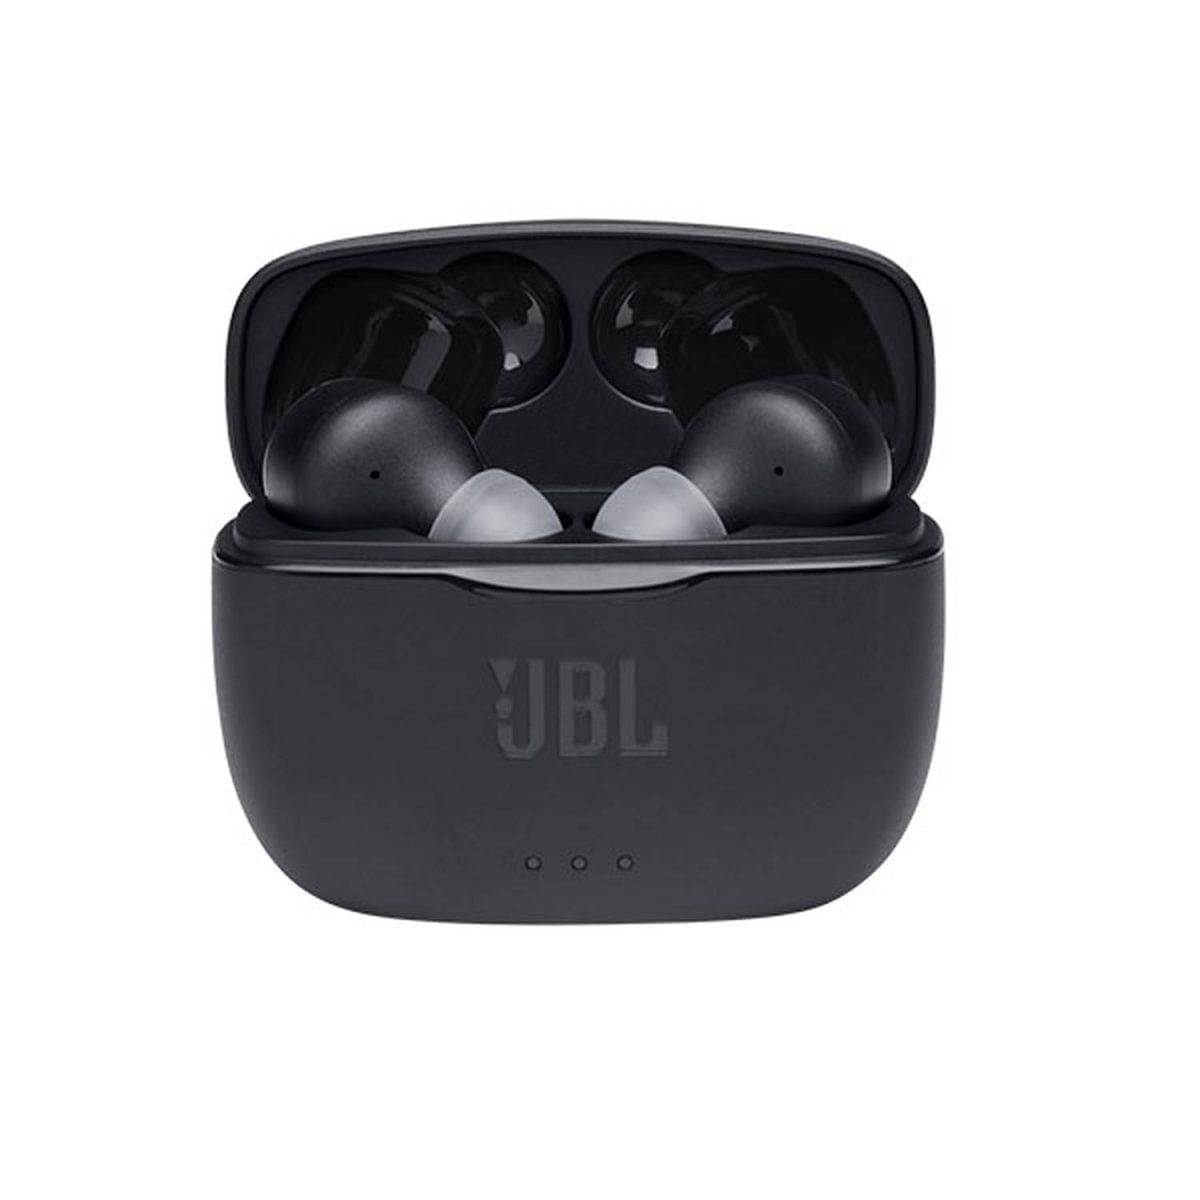 T215Tws Black 02 Smart Crop C0 5 0 5 1500X1500 70 Jbl &Lt;H1 Class=&Quot;Product_Title Entry-Title&Quot;&Gt;Jbl Tune 215 Tws Earbuds - Black&Lt;/H1&Gt; &Lt;Ul&Gt; &Lt;Li&Gt;Dual Connect Gives You The Freedom To Listen To Music Or Attend To Calls With Either One Or Both Earbuds&Lt;/Li&Gt; &Lt;Li&Gt;Offers Up To 5 Hours Of Battery Life And Up To 20 Hours More When Using The Charging Case&Lt;/Li&Gt; &Lt;Li&Gt;Quickly Recharge Via The Usb-C Interface&Lt;/Li&Gt; &Lt;Li&Gt;Charging Case Features A River Stone-Inspired Design, With A Soft Body And A Curved Lid That Pops Out To Give You Quick Access To The Buds&Lt;/Li&Gt; &Lt;/Ul&Gt; Jbl Earphones Jbl Tune 215 Tws Earbuds - Black